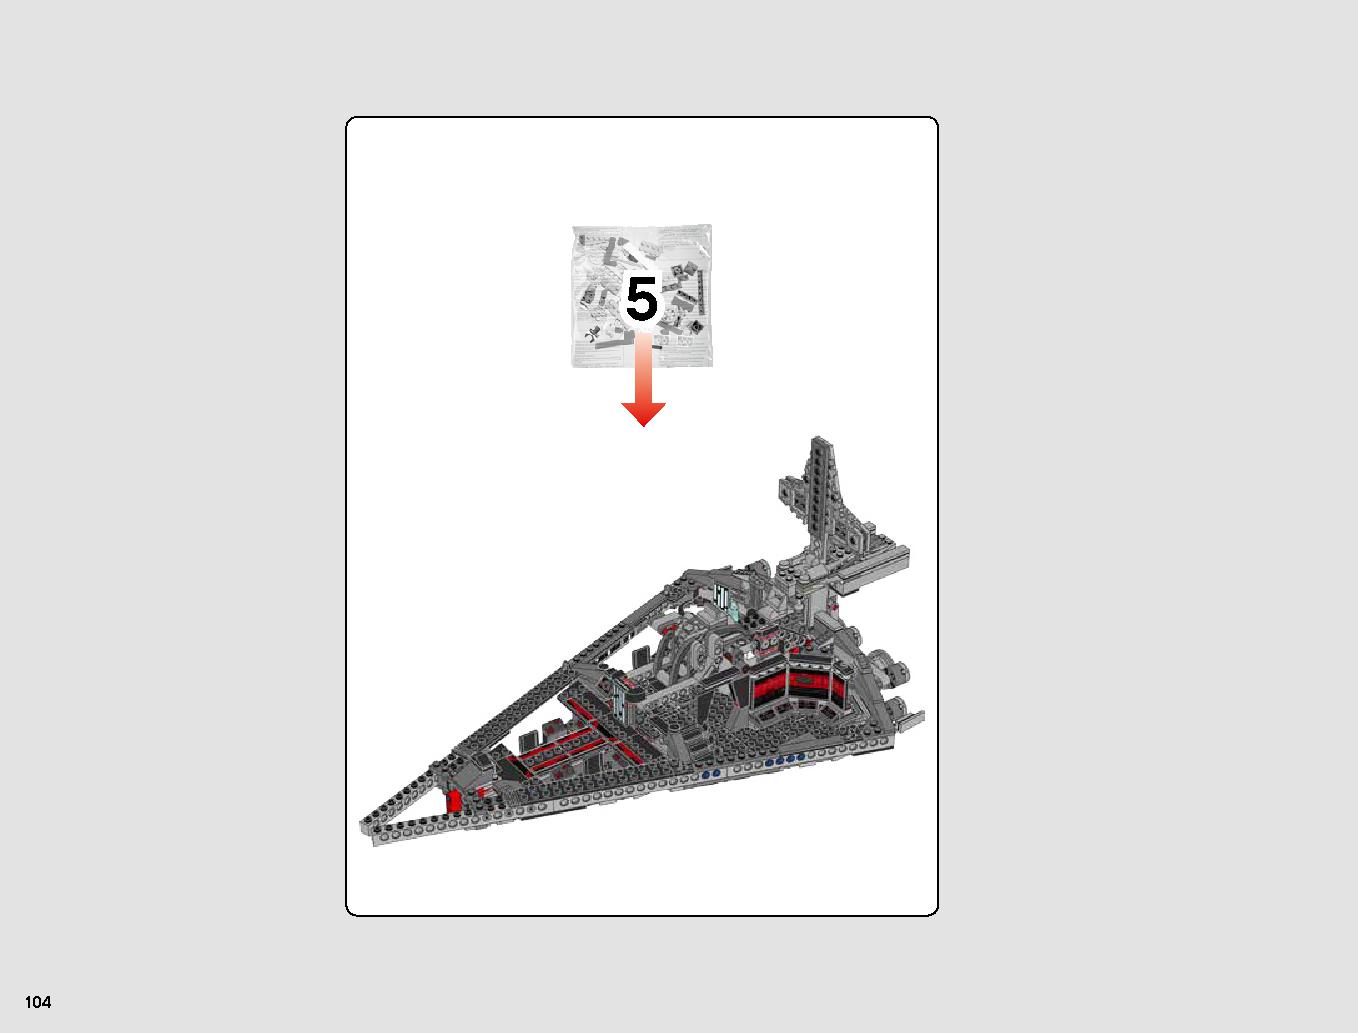 First Order Star Destroyer 75190 レゴの商品情報 レゴの説明書・組立方法 104 page